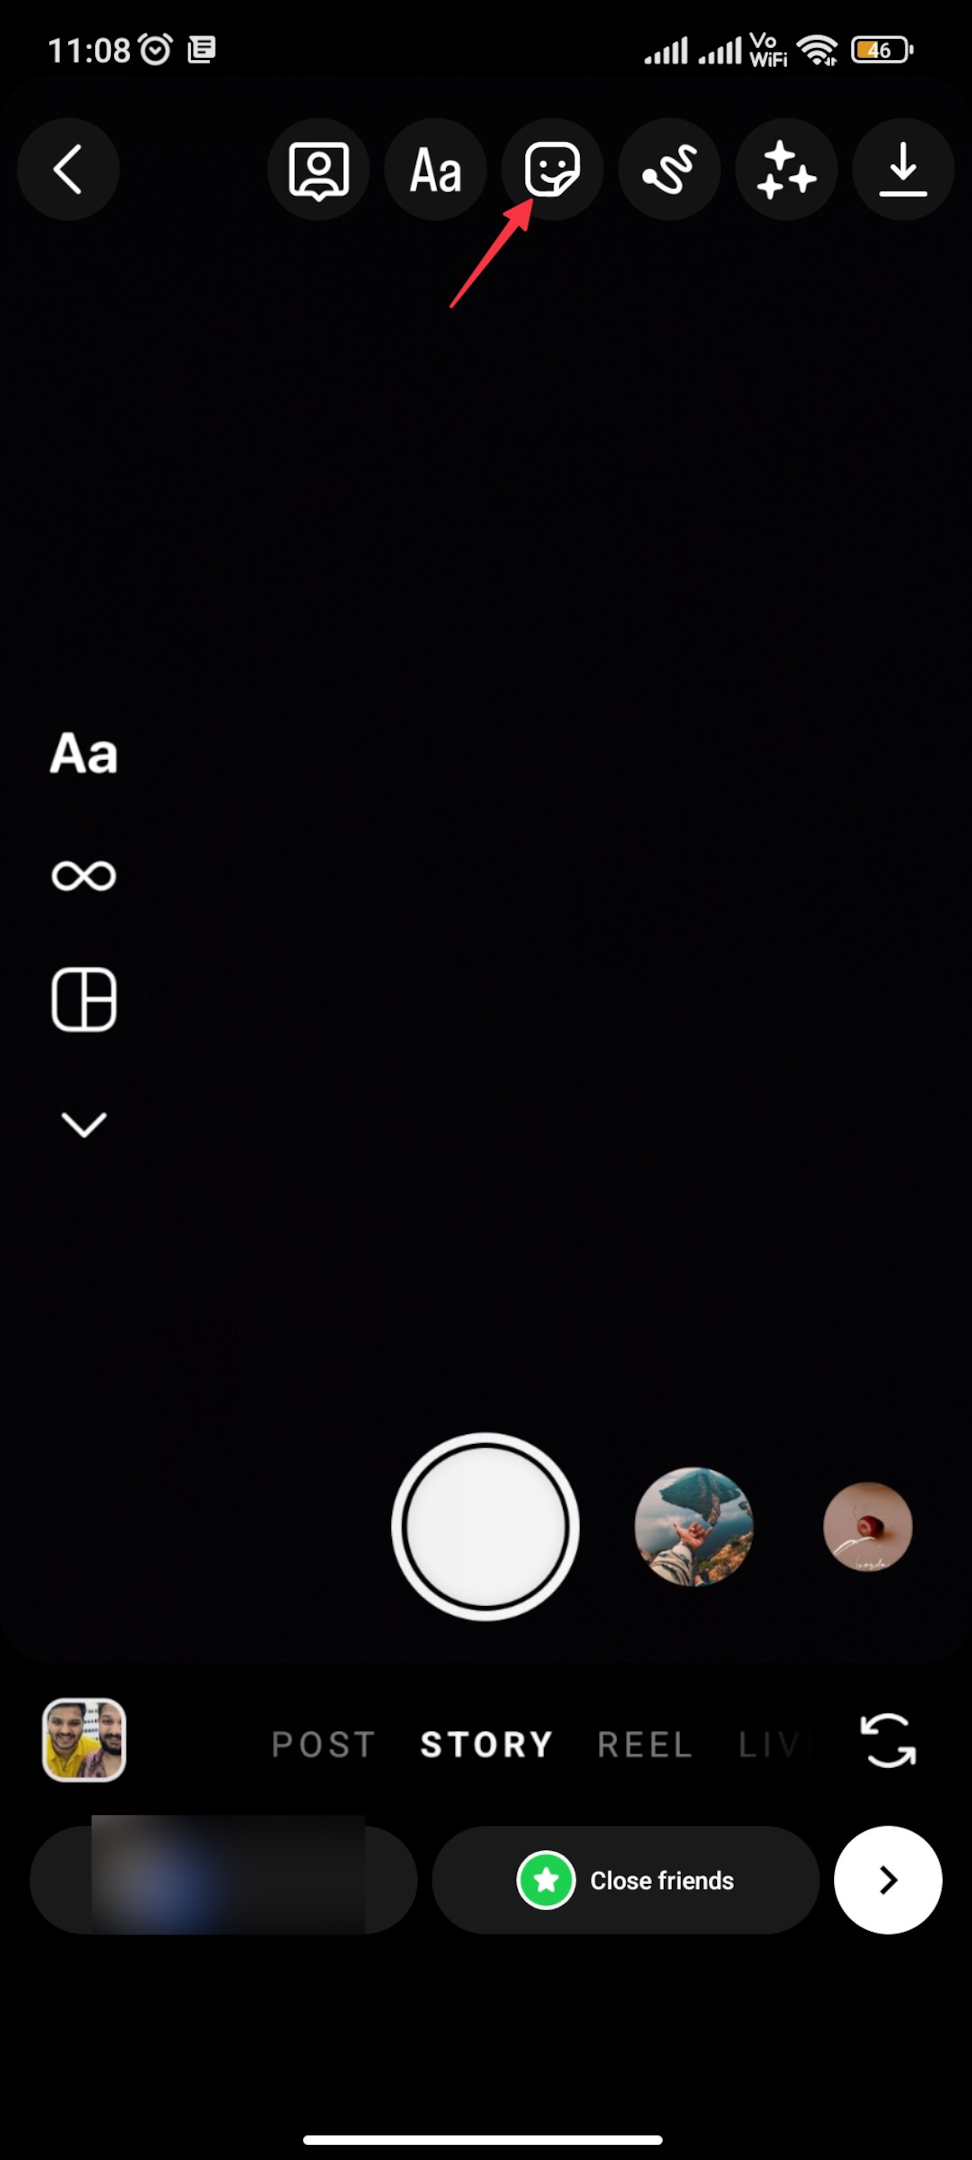 Remote.tools shows how to add stickers to Instagram story